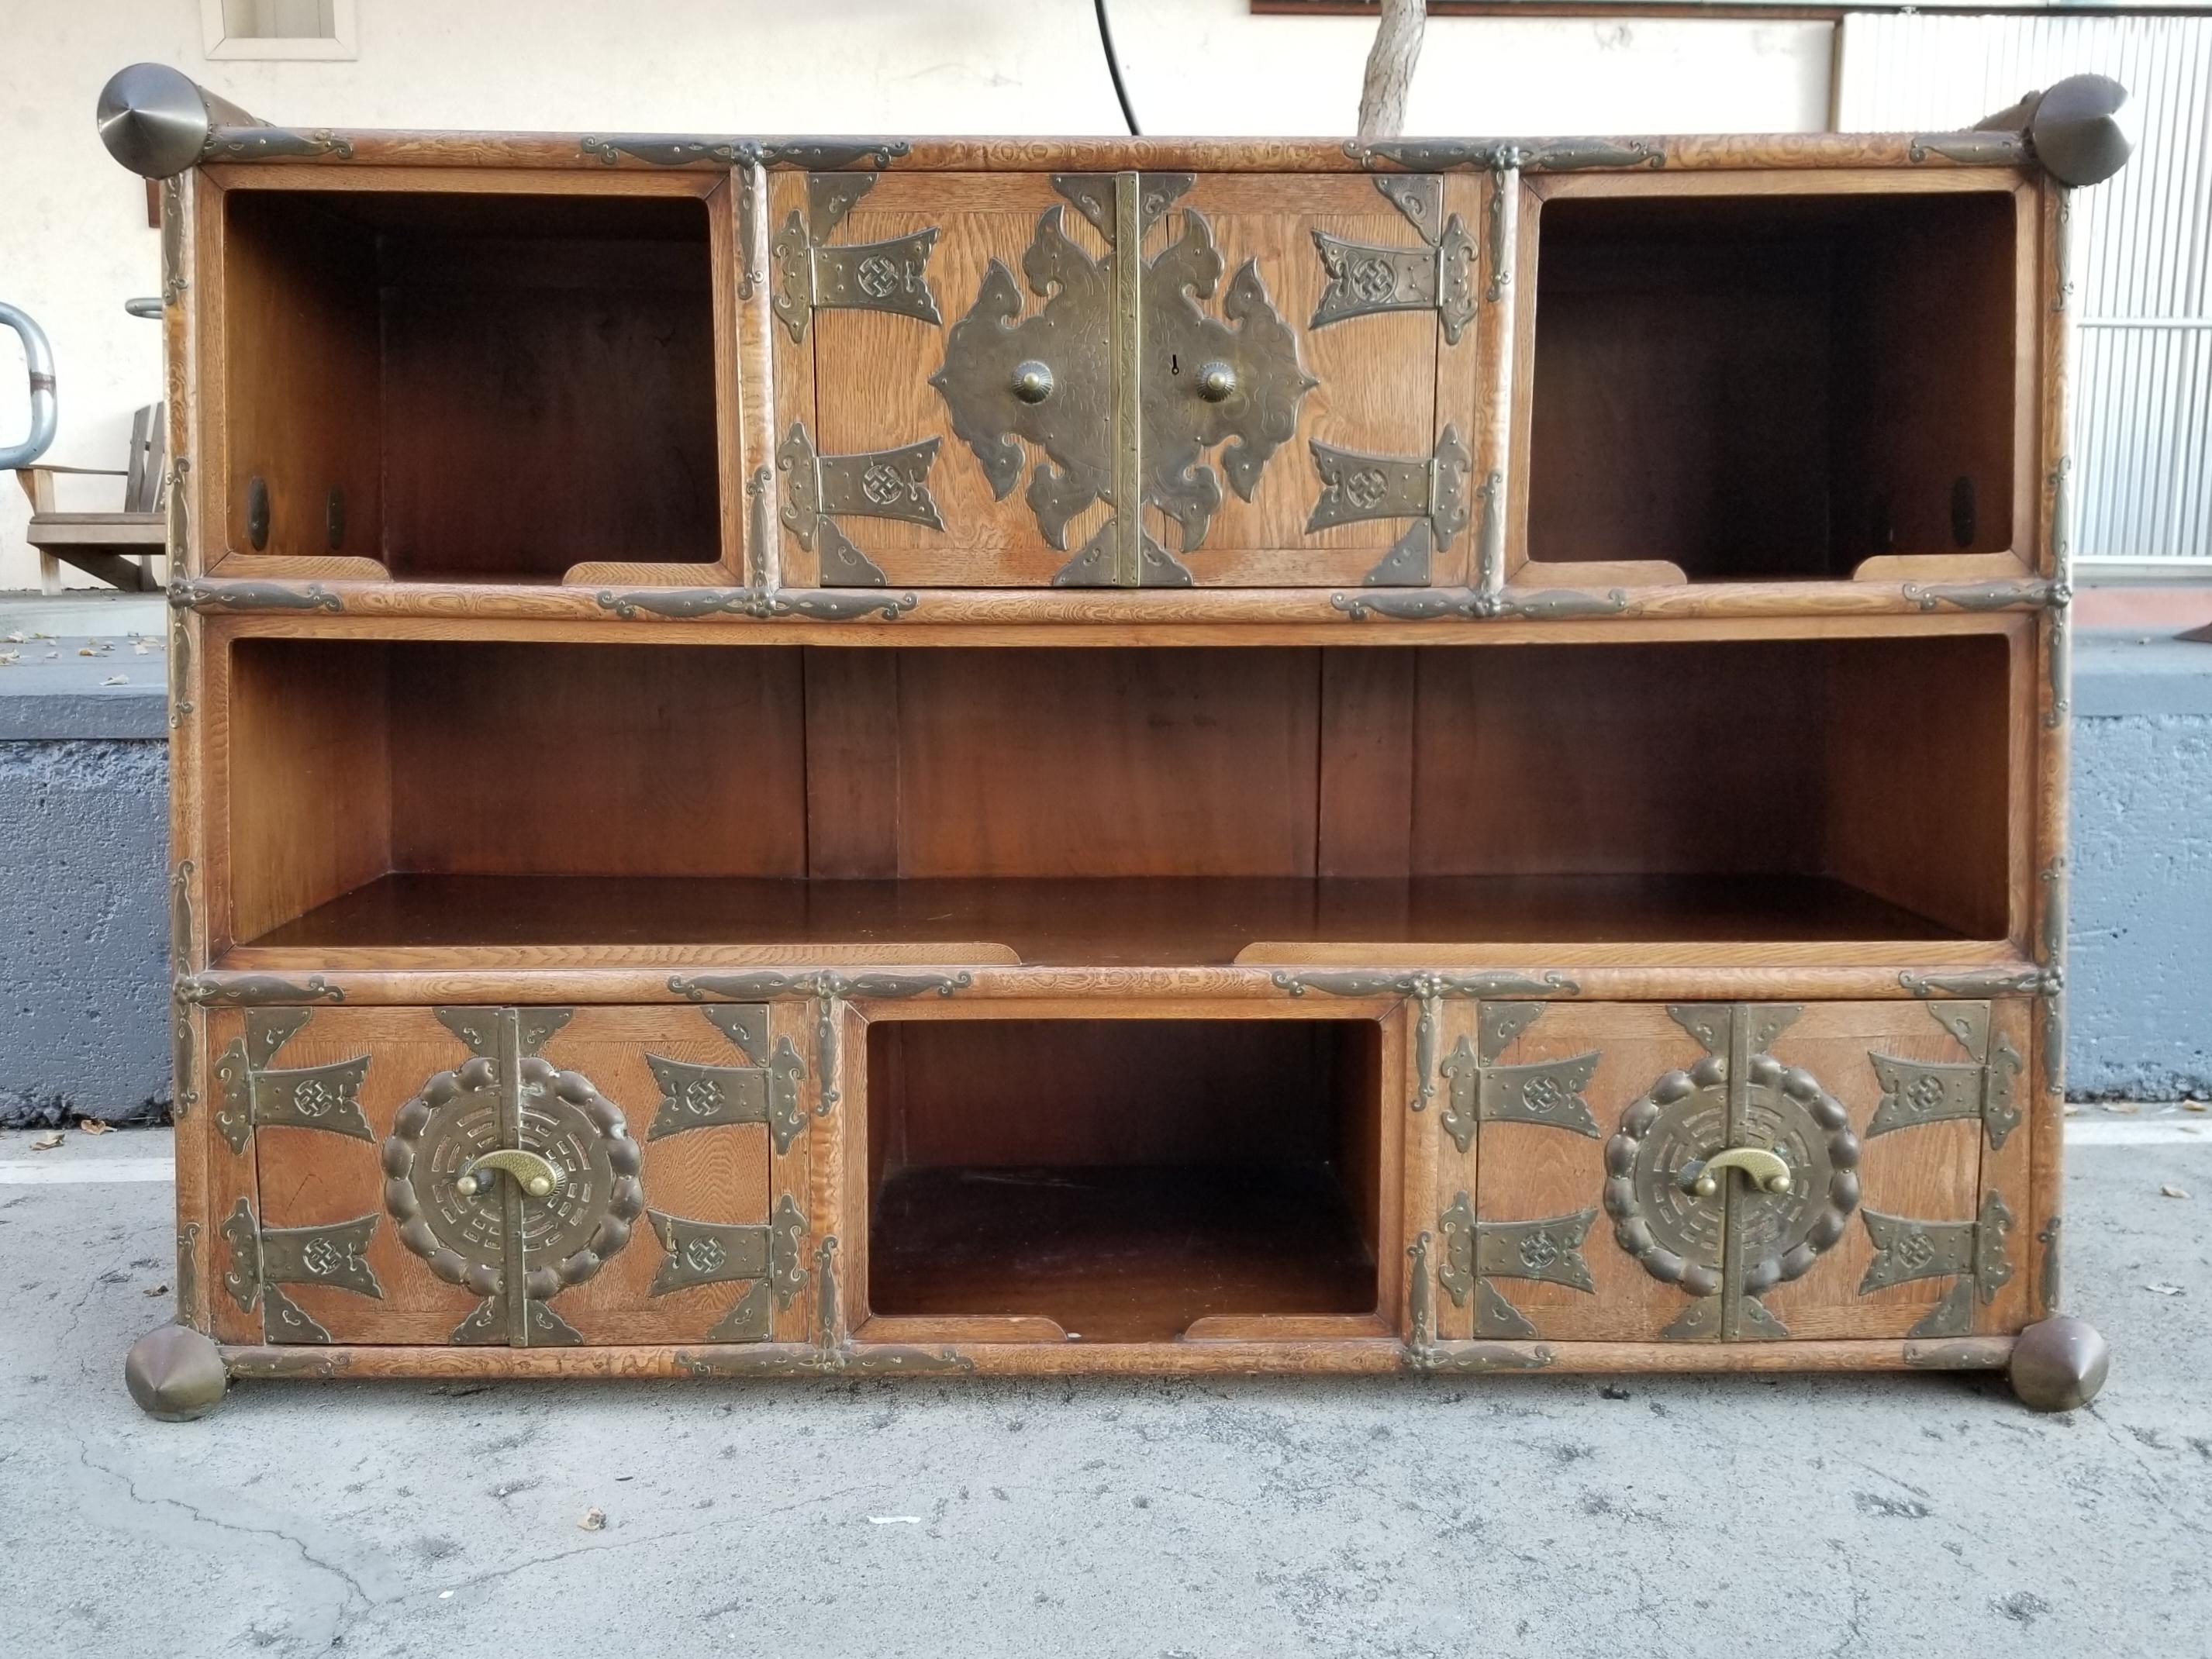 Unusual early 20th century Tansu with elaborate brass work and canted sides. Three pairs of cabinet doors exposing interior drawers and storage accompanied by open shelving. Dramatic upper and lower brass corner decoration. Large-scale brass handles